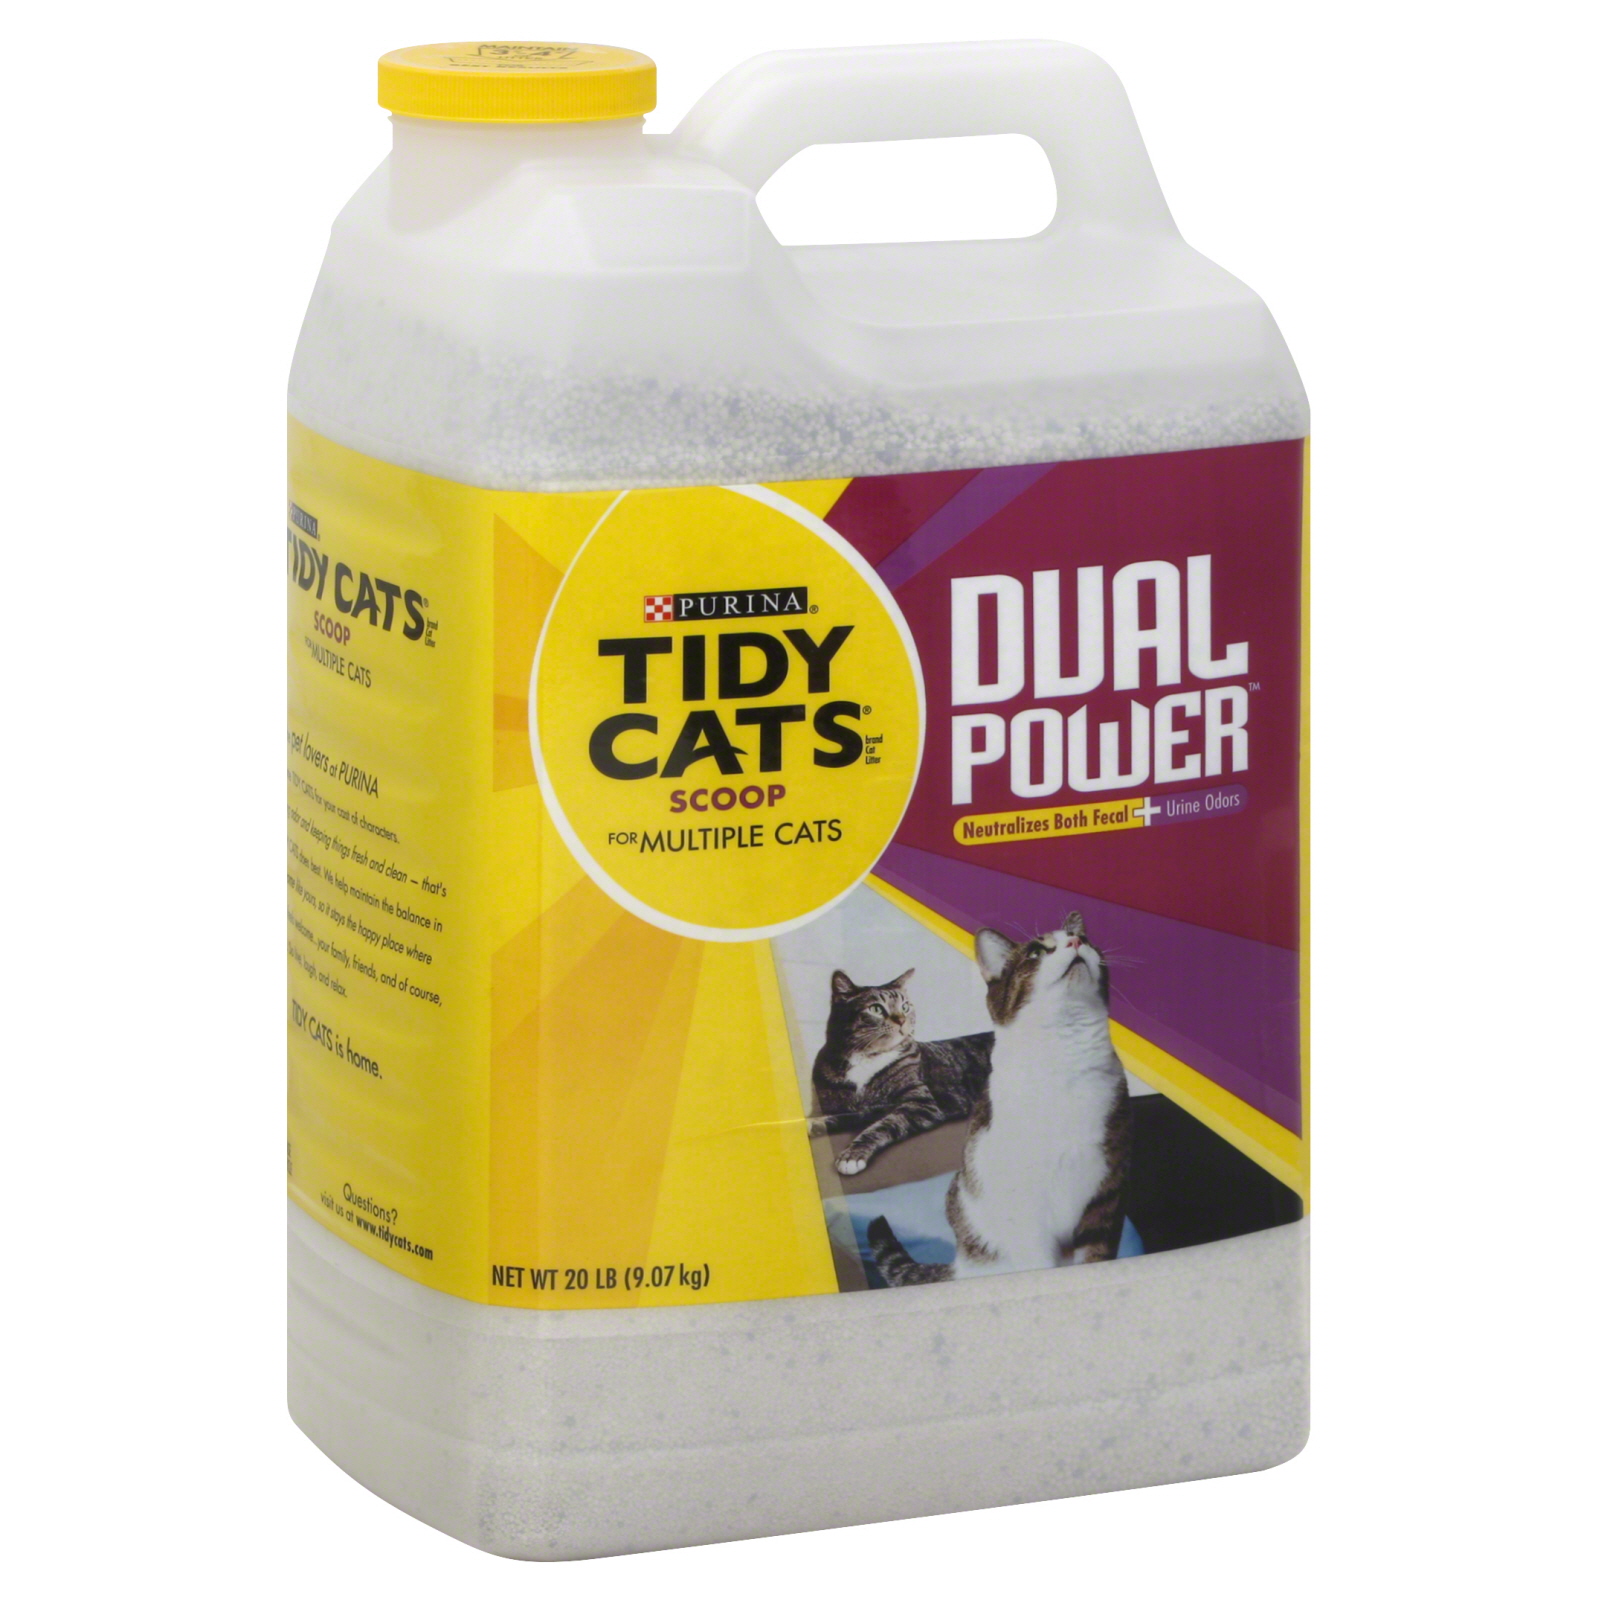 Purina Tidy Cats Clumping Cat Litter, Glade Clear Springs Multi Cat